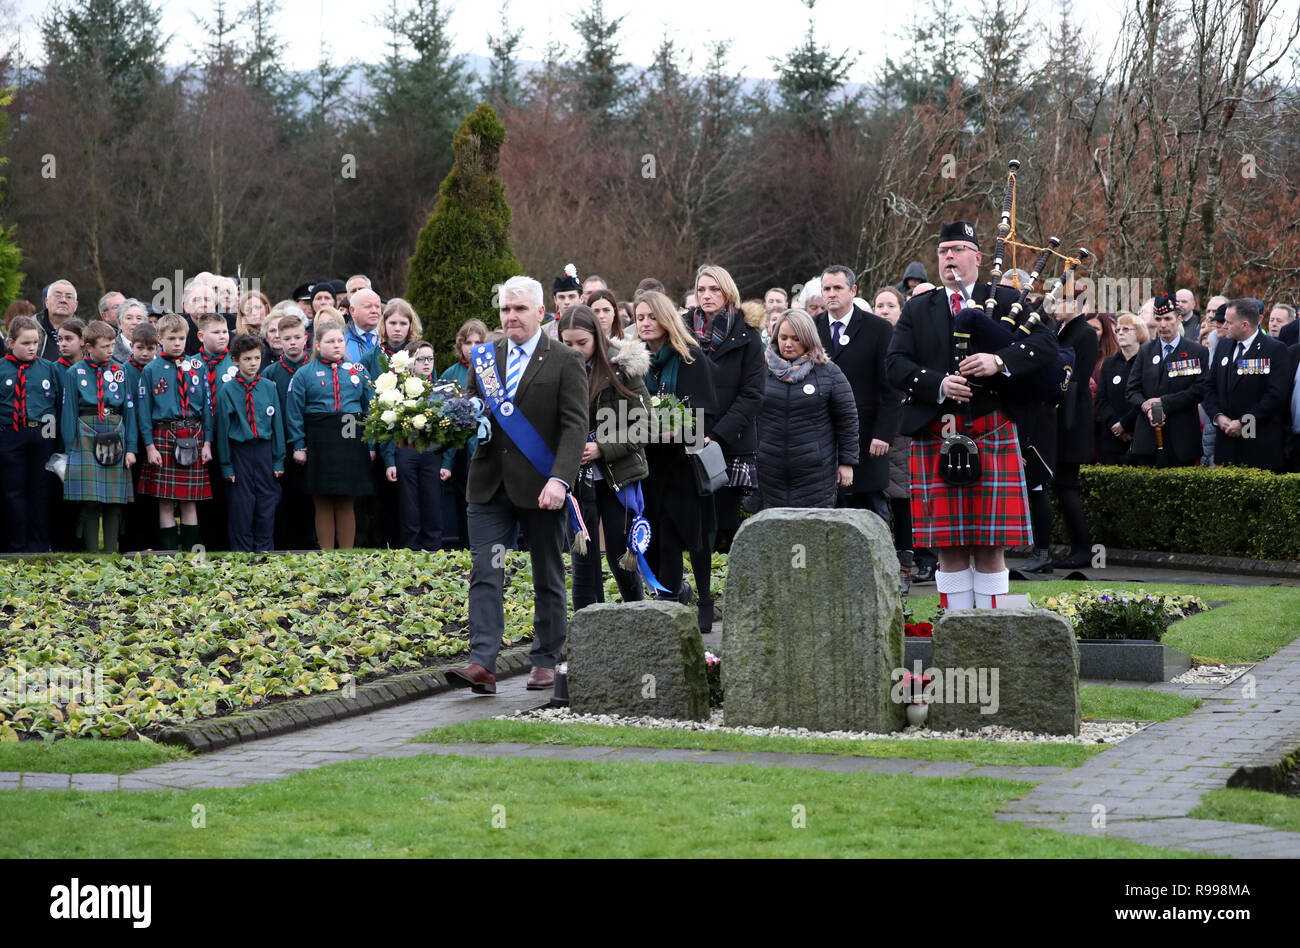 A piper plays as people gather to pay their respects at the commemoration service to mark the 30th anniversary of the Lockerbie bombing at the Memorial Garden, Dryfesdale Cemetery, Lockerbie. Stock Photo